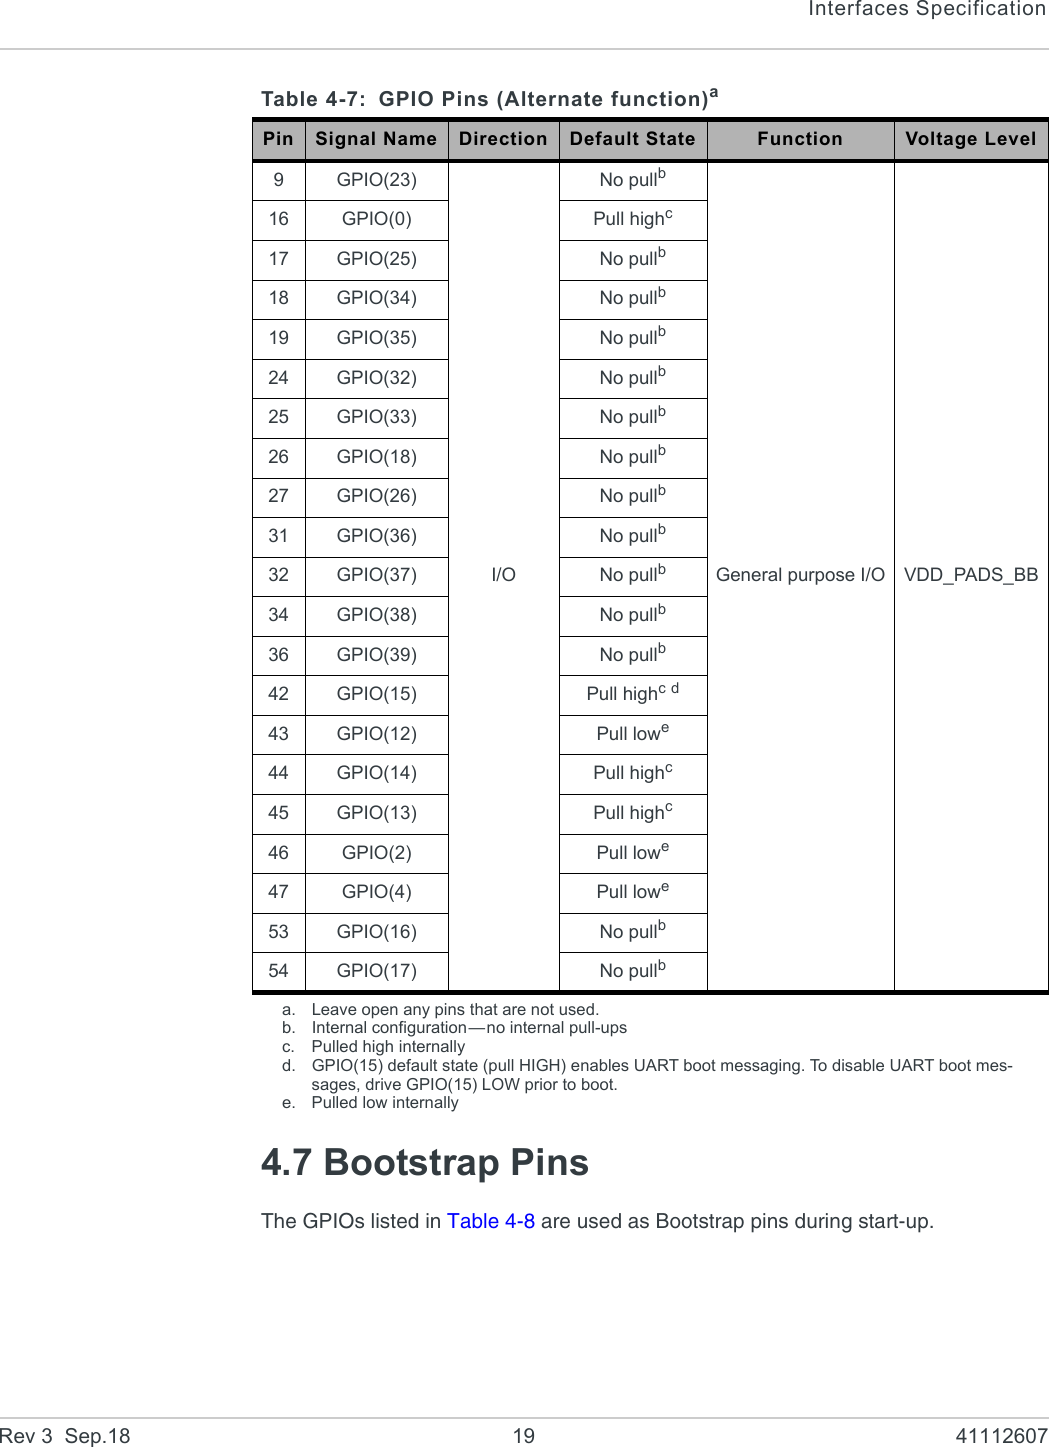 Interfaces SpecificationRev 3  Sep.18 19 411126074.7 Bootstrap PinsThe GPIOs listed in Table 4-8 are used as Bootstrap pins during start-up.Table 4-7: GPIO Pins (Alternate function)aPin Signal Name Direction Default State Function Voltage Level9GPIO(23)I/ONo pullbGeneral purpose I/O VDD_PADS_BB16 GPIO(0) Pull highc17 GPIO(25) No pullb18 GPIO(34) No pullb19 GPIO(35) No pullb24 GPIO(32) No pullb25 GPIO(33) No pullb26 GPIO(18) No pullb27 GPIO(26) No pullb31 GPIO(36) No pullb32 GPIO(37) No pullb34 GPIO(38) No pullb36 GPIO(39) No pullb42 GPIO(15) Pull highc d43 GPIO(12) Pull lowe44 GPIO(14) Pull highc45 GPIO(13) Pull highc46 GPIO(2) Pull lowe47 GPIO(4) Pull lowe53 GPIO(16) No pullb54 GPIO(17) No pullba. Leave open any pins that are not used.b. Internal configuration—no internal pull-upsc. Pulled high internallyd. GPIO(15) default state (pull HIGH) enables UART boot messaging. To disable UART boot mes-sages, drive GPIO(15) LOW prior to boot.e. Pulled low internally